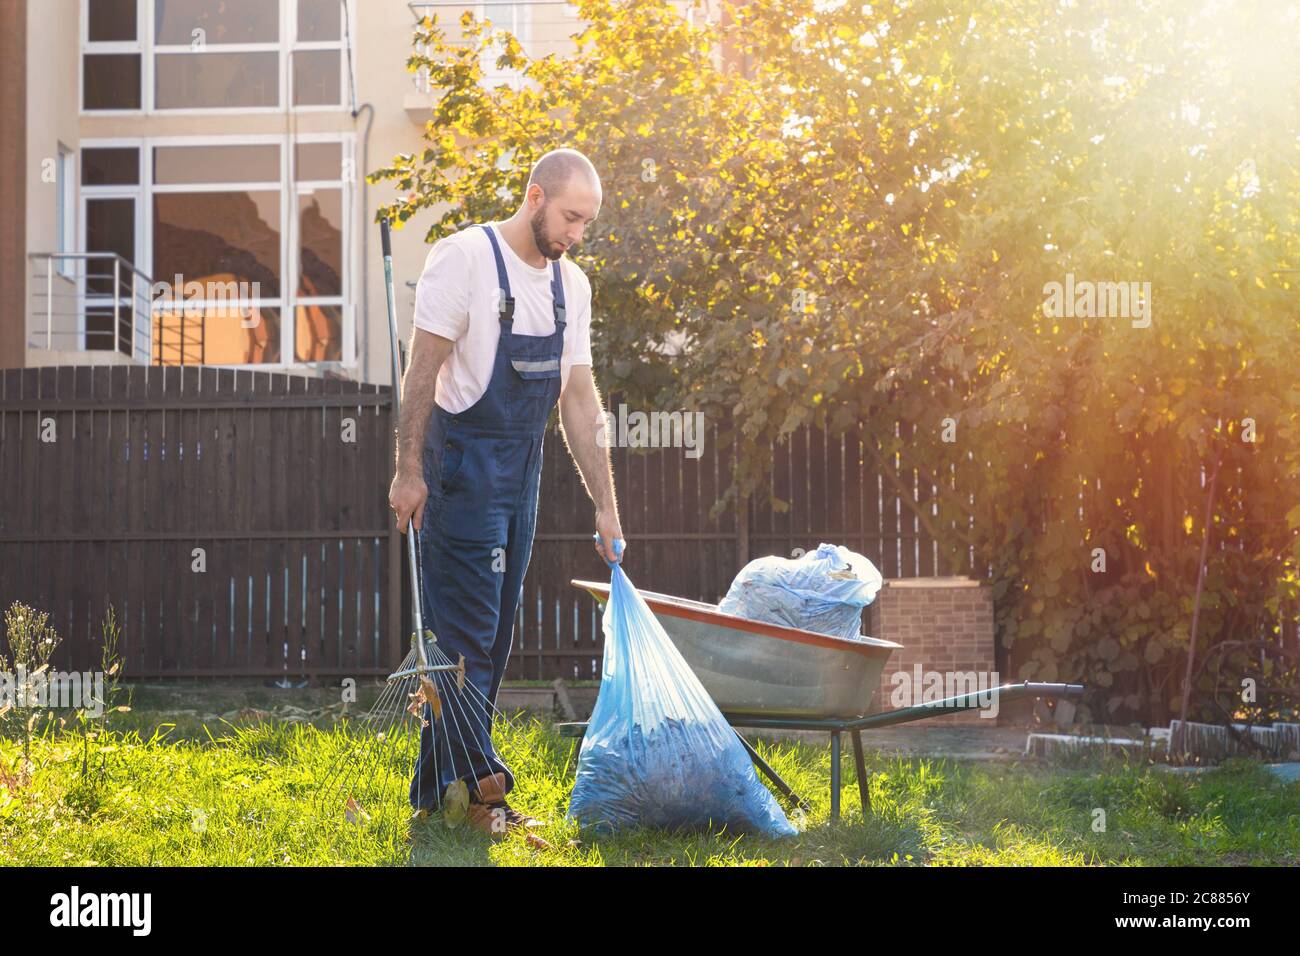 https://c8.alamy.com/comp/2C8856Y/the-gardener-collects-the-bags-of-leaves-and-puts-them-in-the-cart-the-sun-shines-brightly-on-the-right-side-2C8856Y.jpg